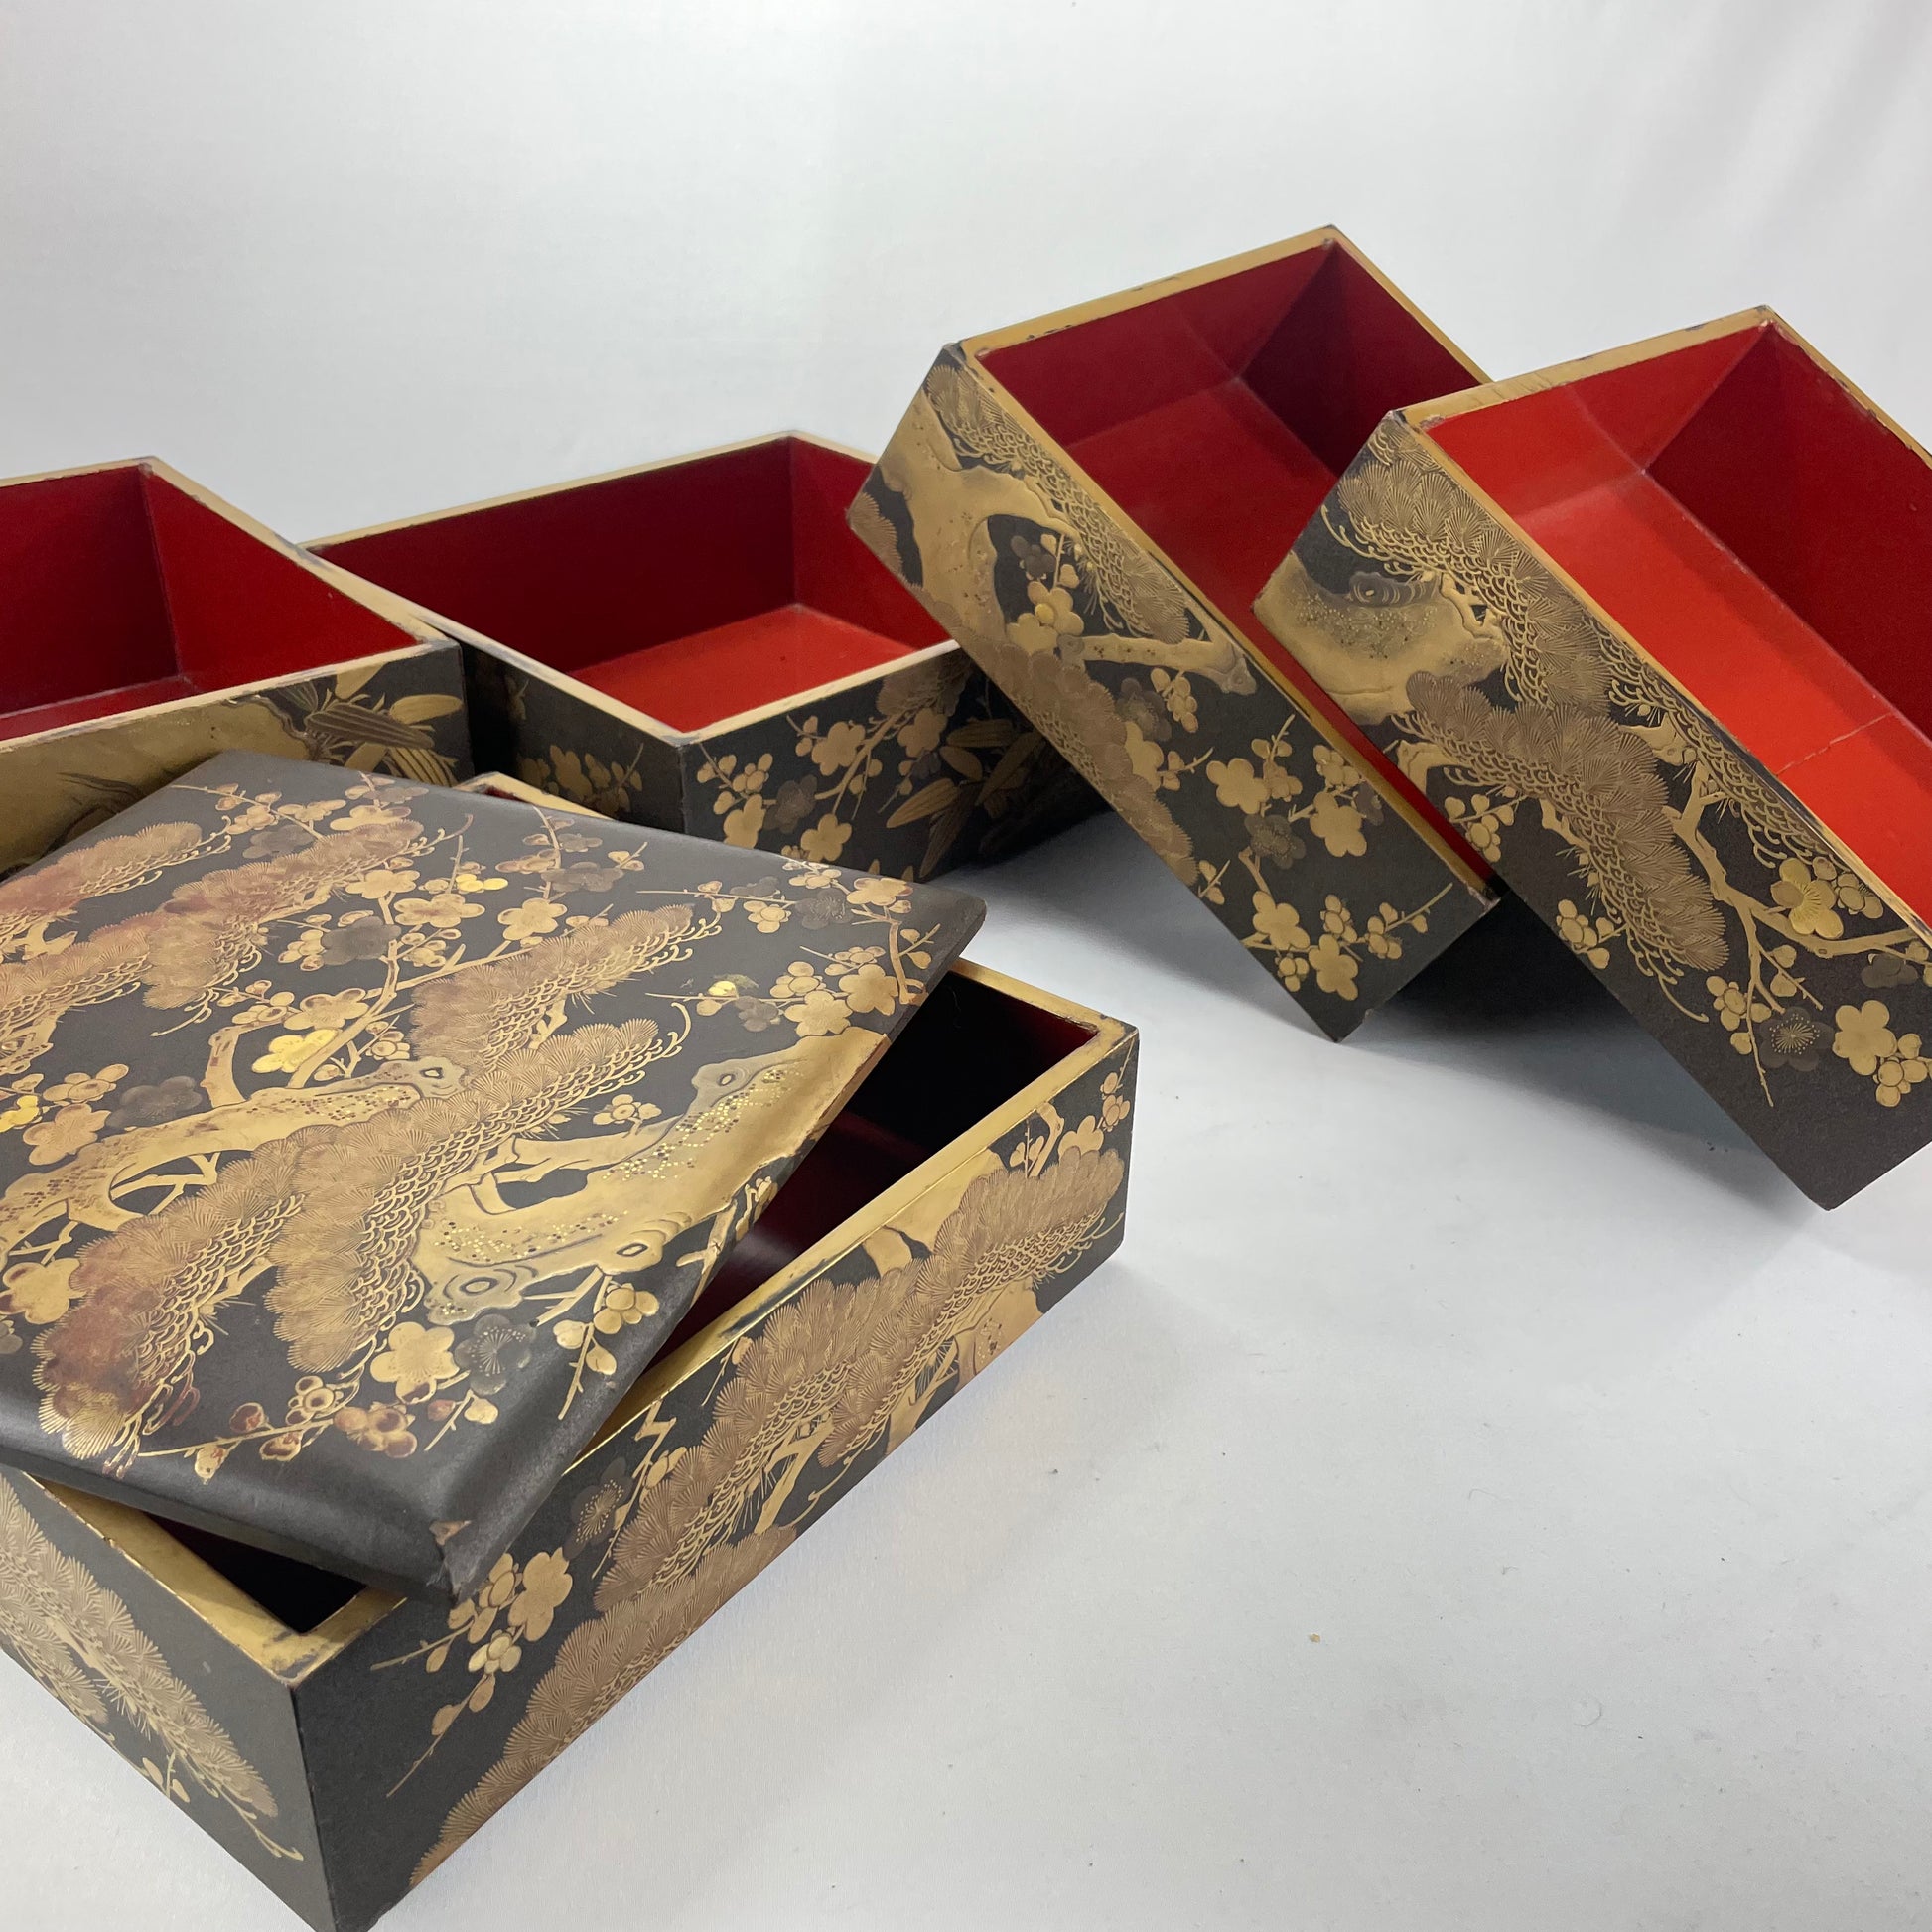 Gifts of Gold: The Art of Japanese Lacquer Boxes